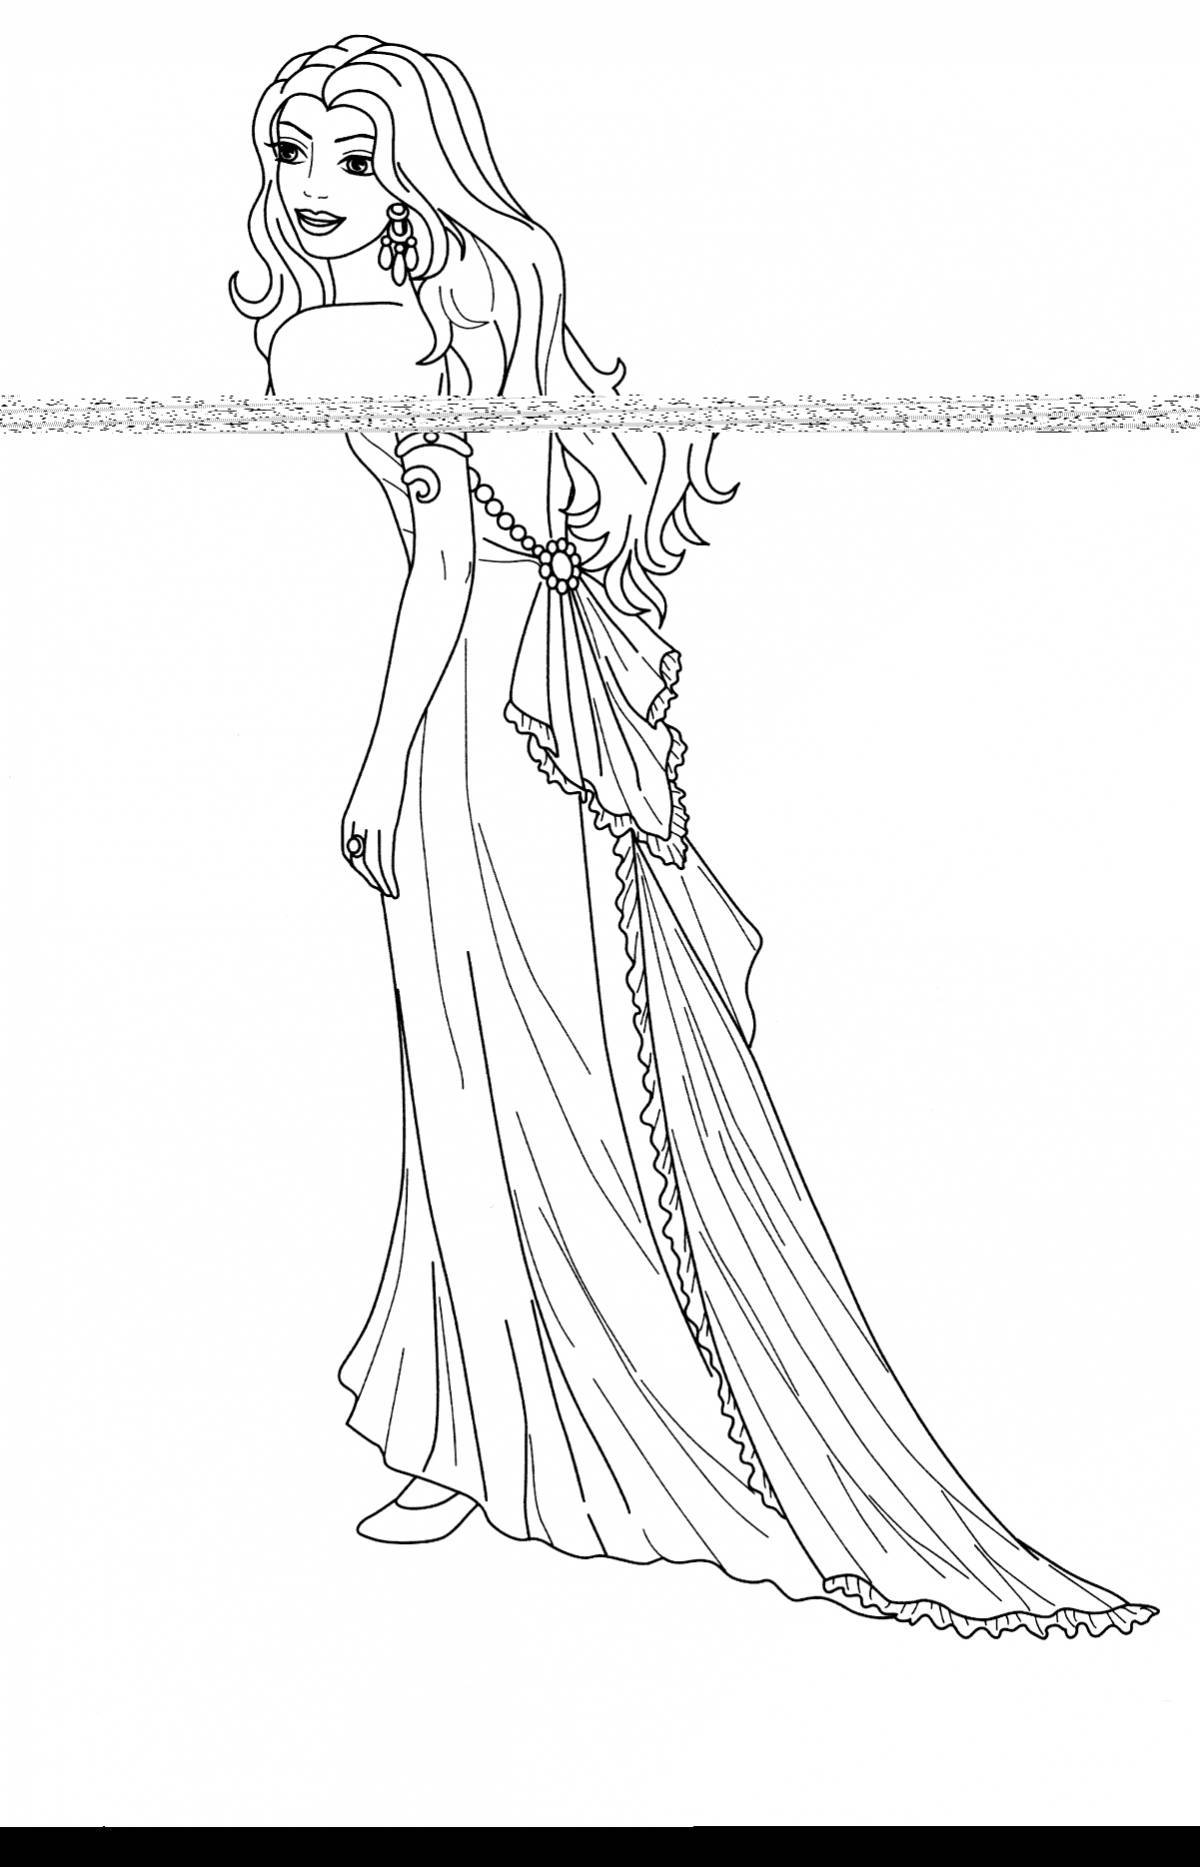 Gorgeous coloring pages of princesses in beautiful dresses